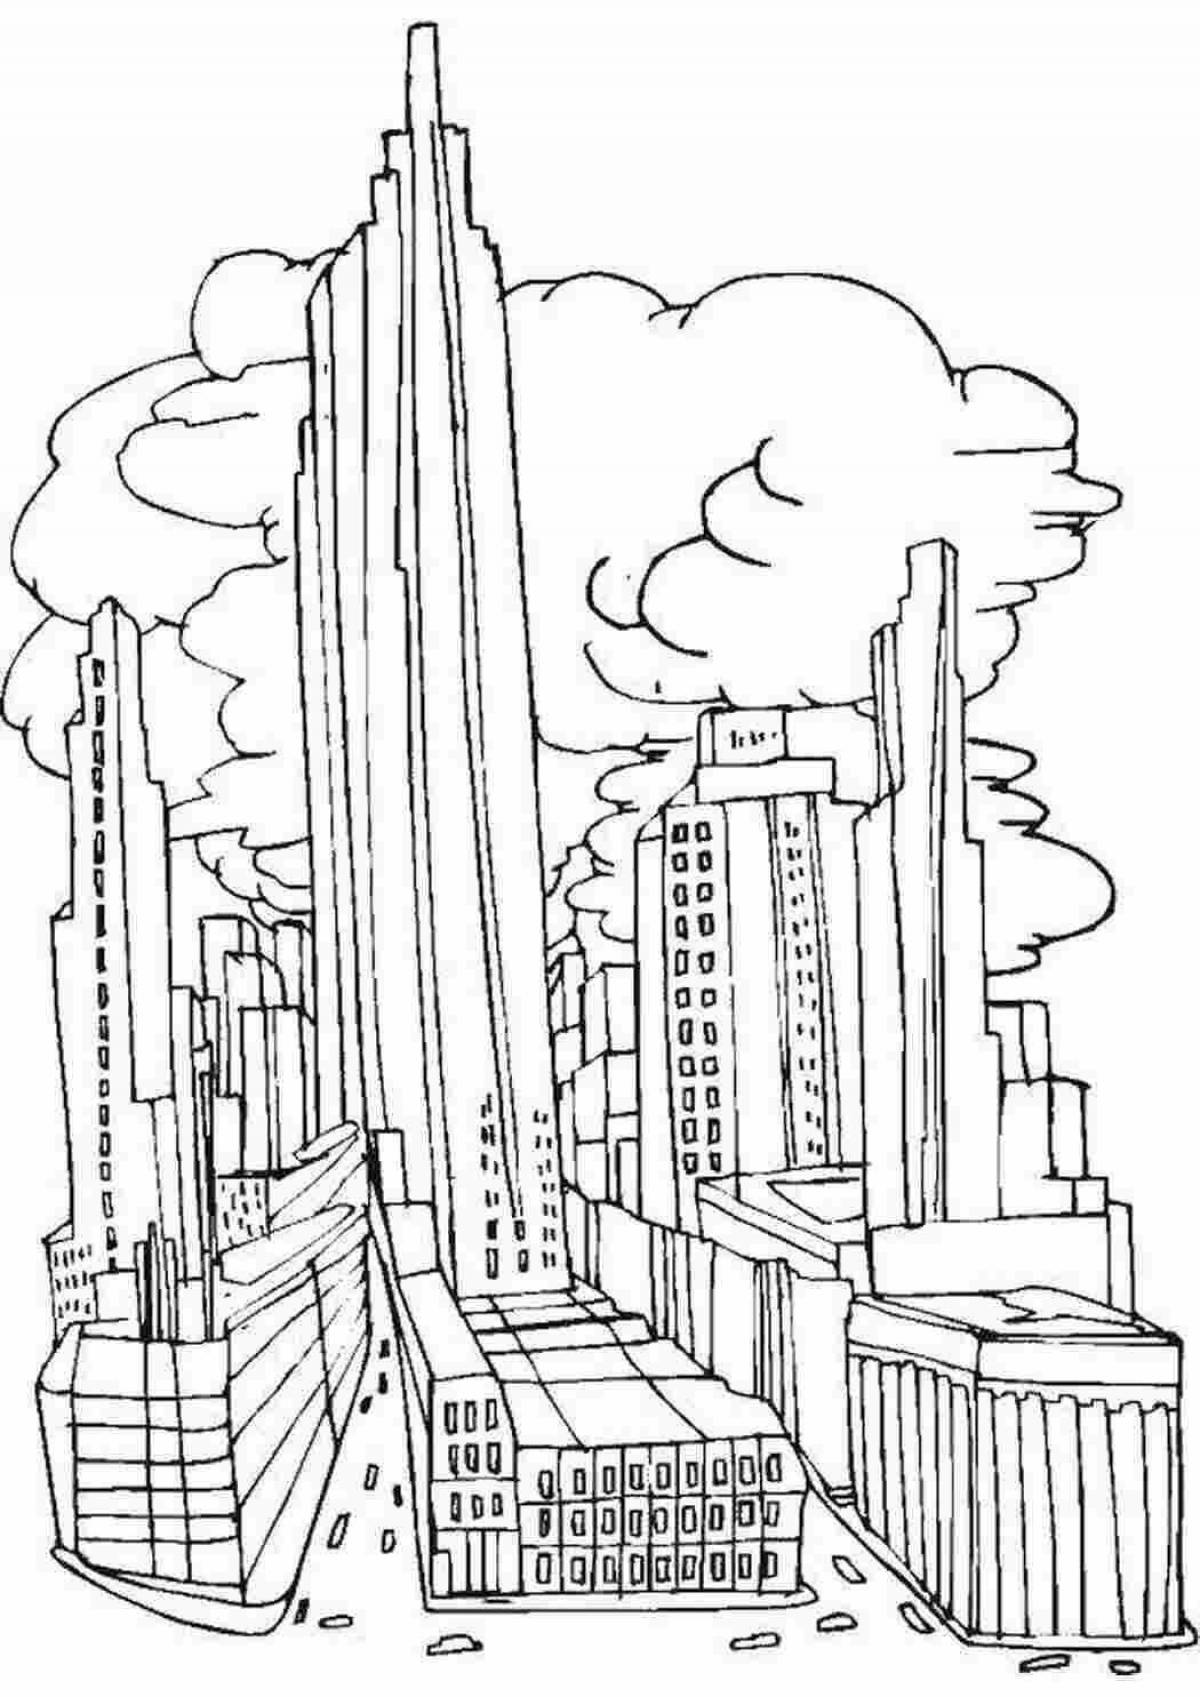 Awesome skyscraper coloring pages for kids